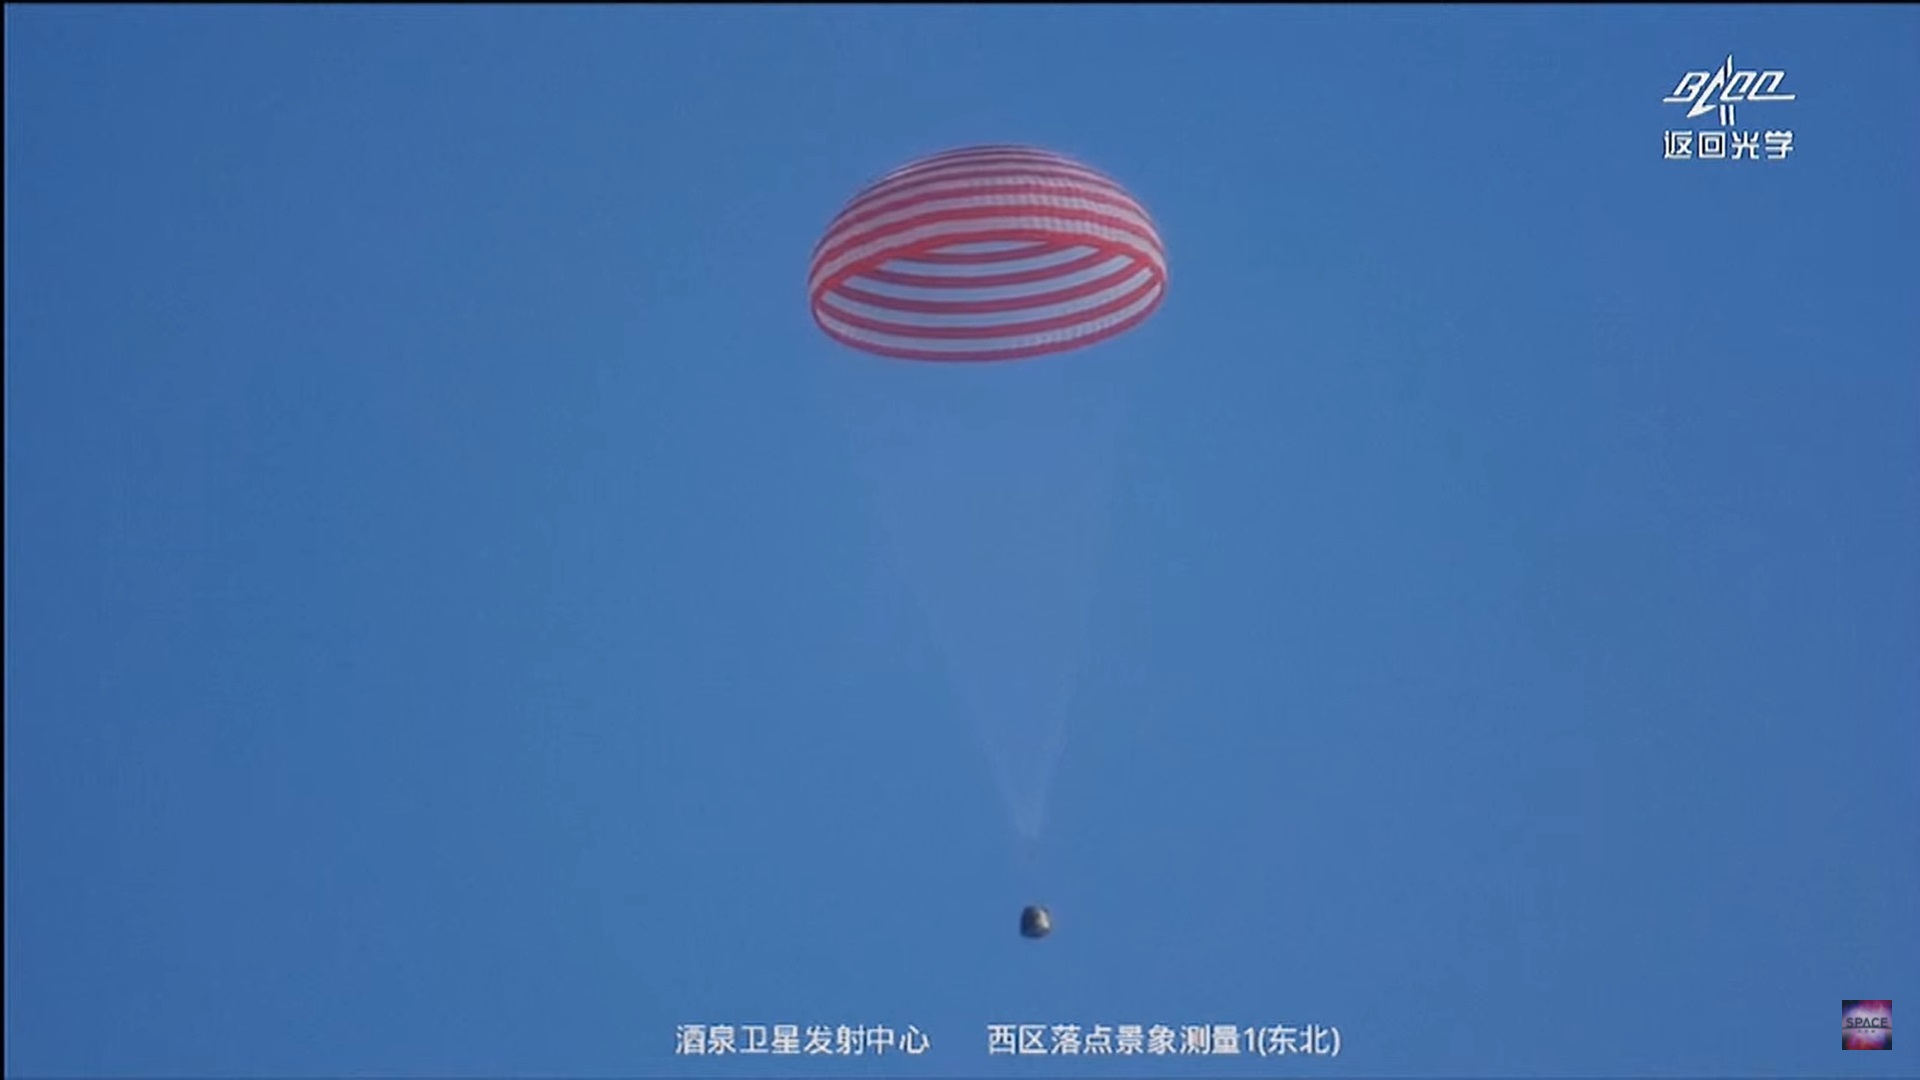 Shenzhou 13 Chinese steamships are taking over the three countries safely in the Inner Mongolia Autonomous Region after a six -month record stay at Tiangong airport on April 16, 2022.